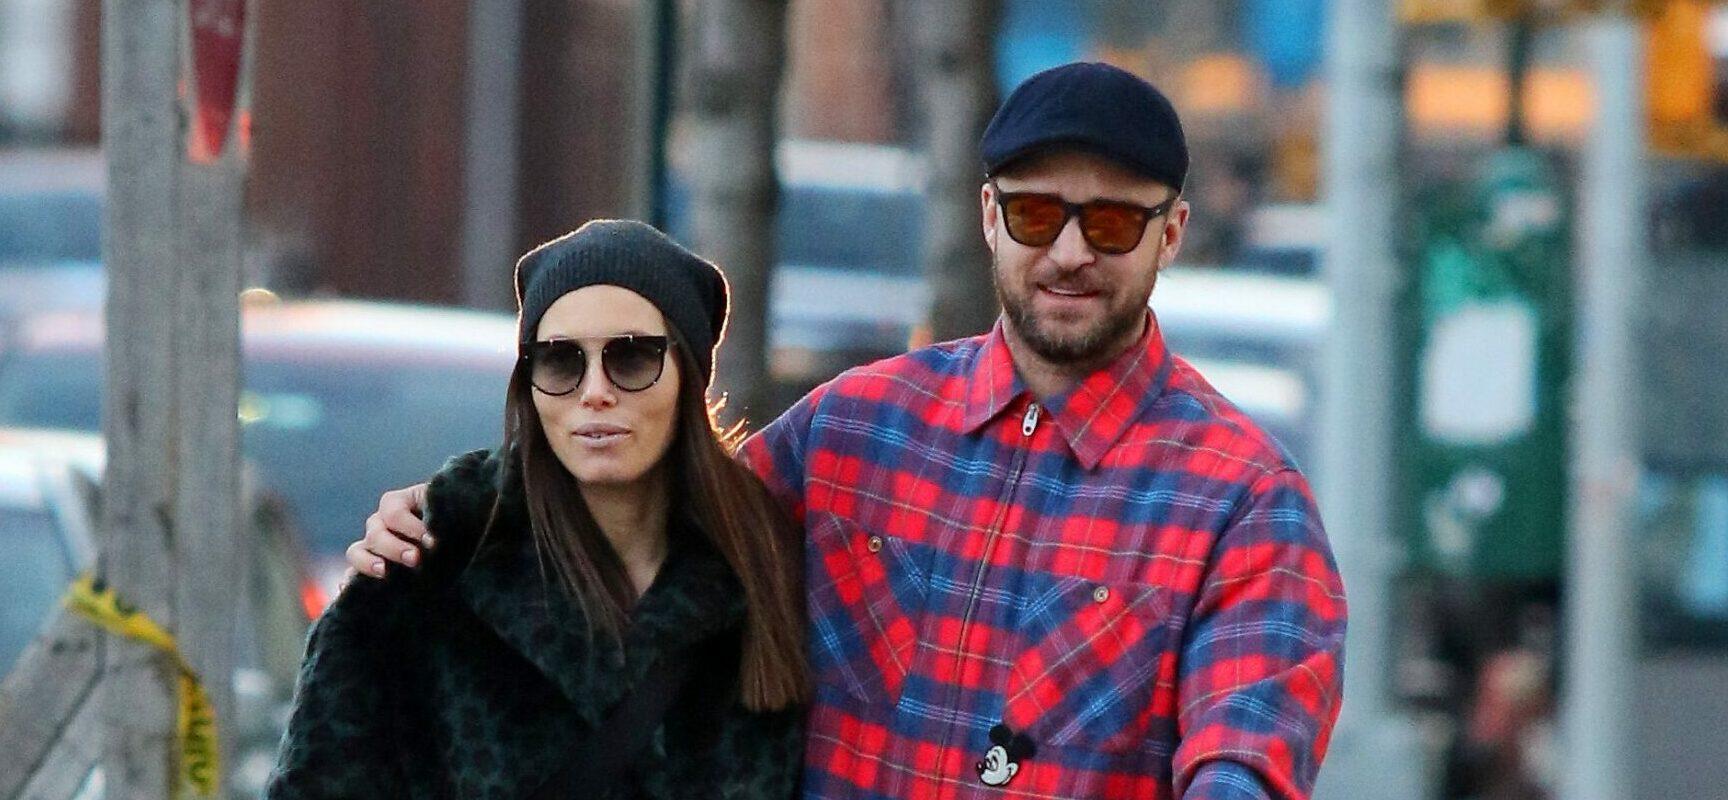 Justin Timberlake and Jessica Biel are all smiles with their son Silas after having a late afternoon lunch in NYC